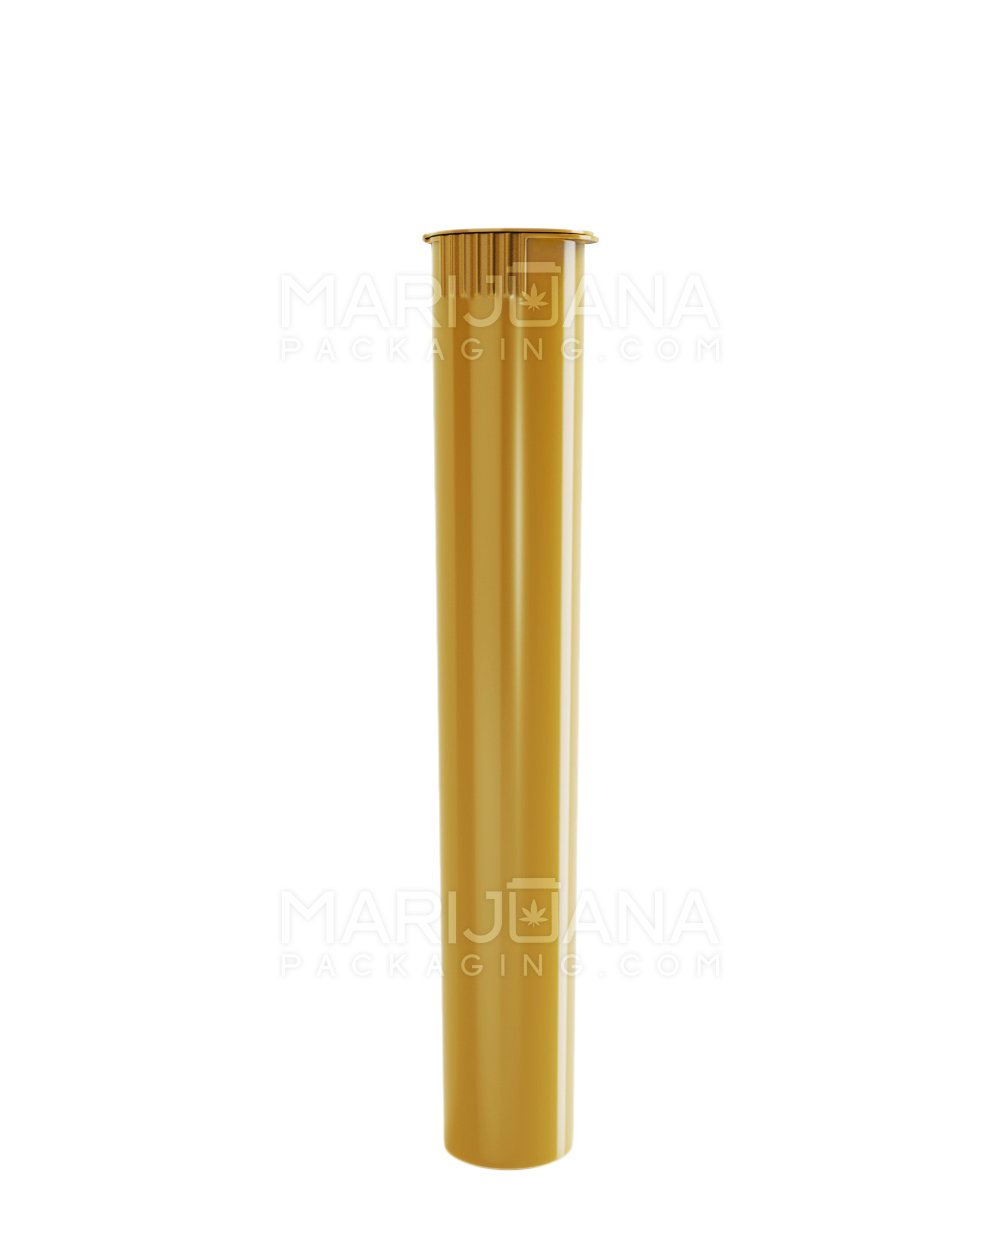 Child Resistant | King Size Pop Top Opaque Plastic Pre-Roll Tubes | 116mm - Gold - 1000 Count - 2